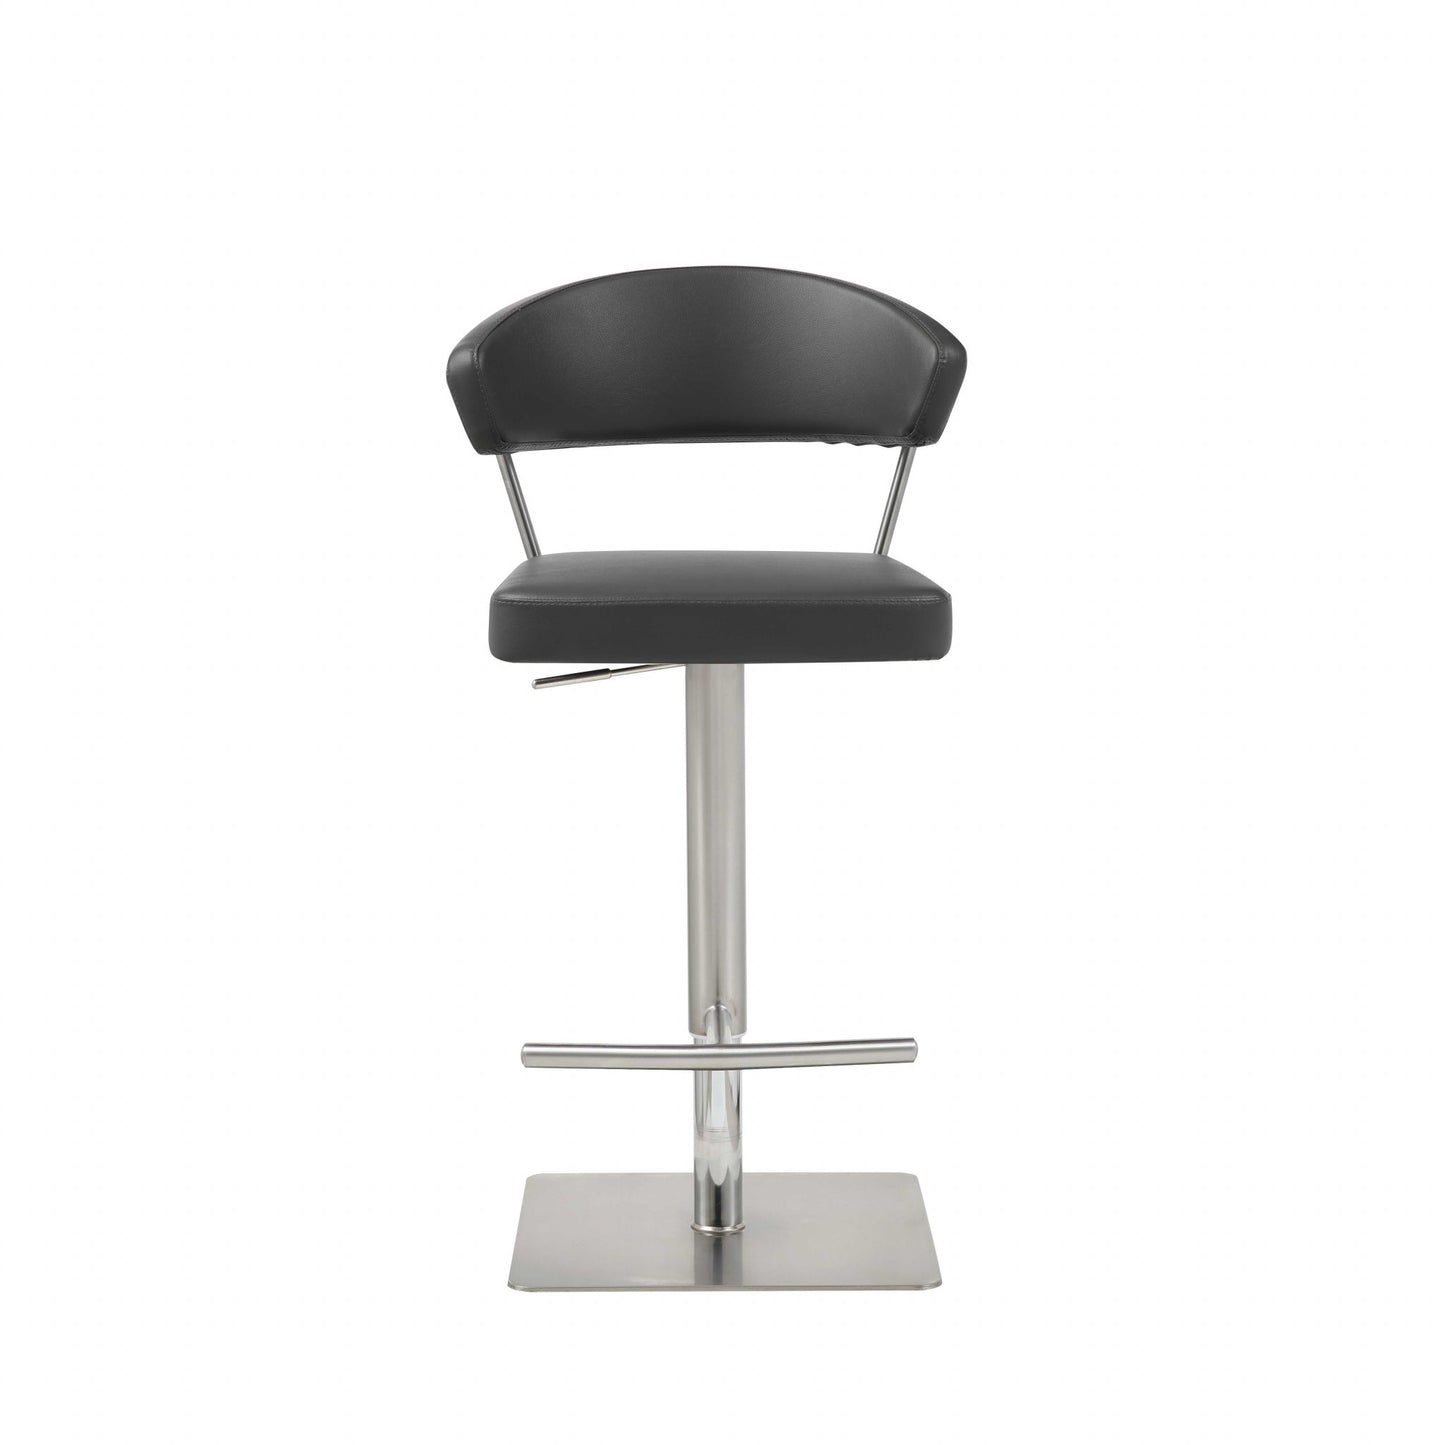 34" Black And Silver Stainless Steel Chair With Footrest